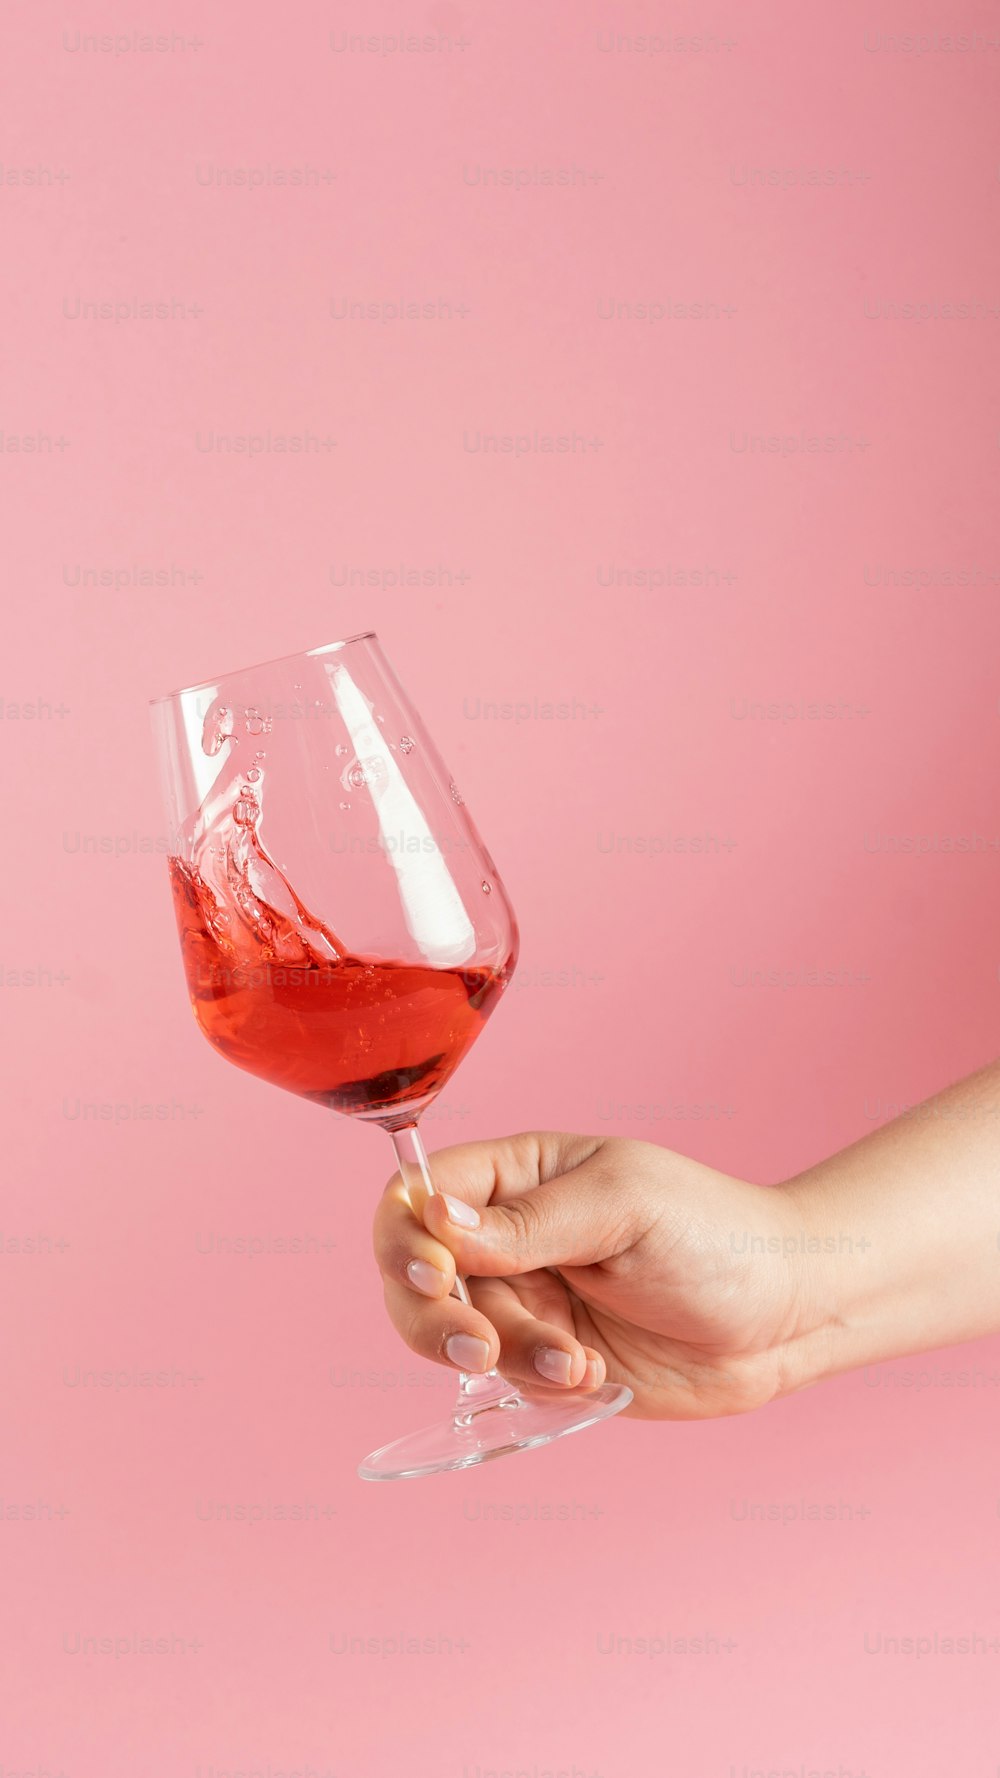 a person holding a wine glass with red wine in it